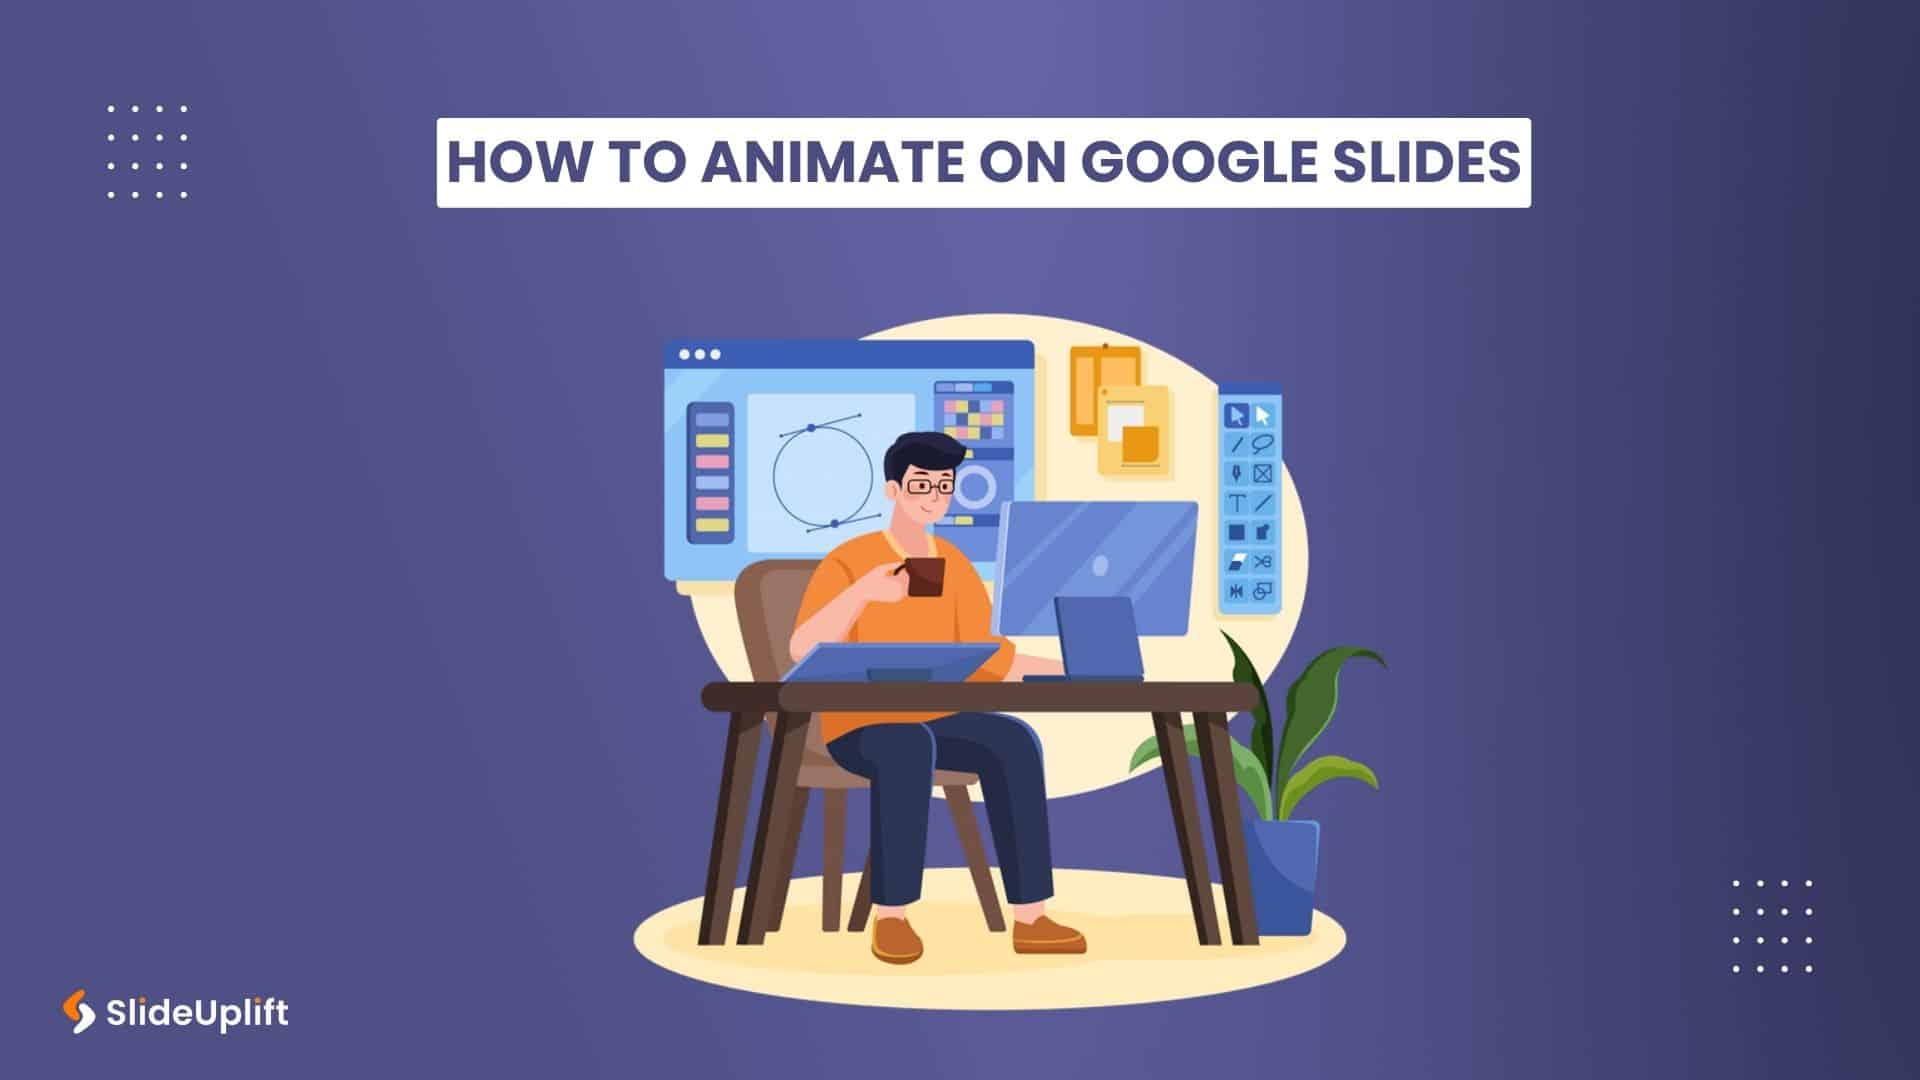 How To Animate On Google Slides?